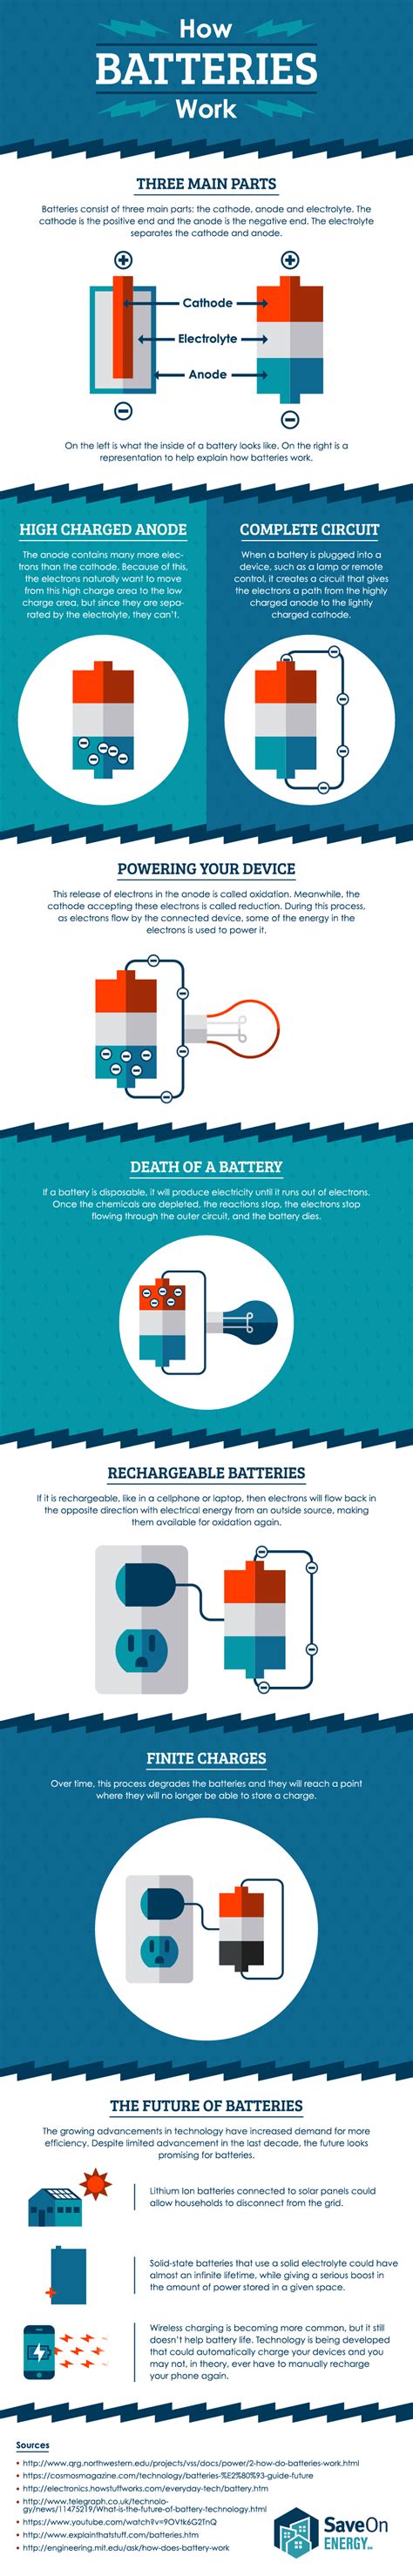 How Batteries Work: An Animated Guide to the Science of Batteries | Work infographic, How to ...